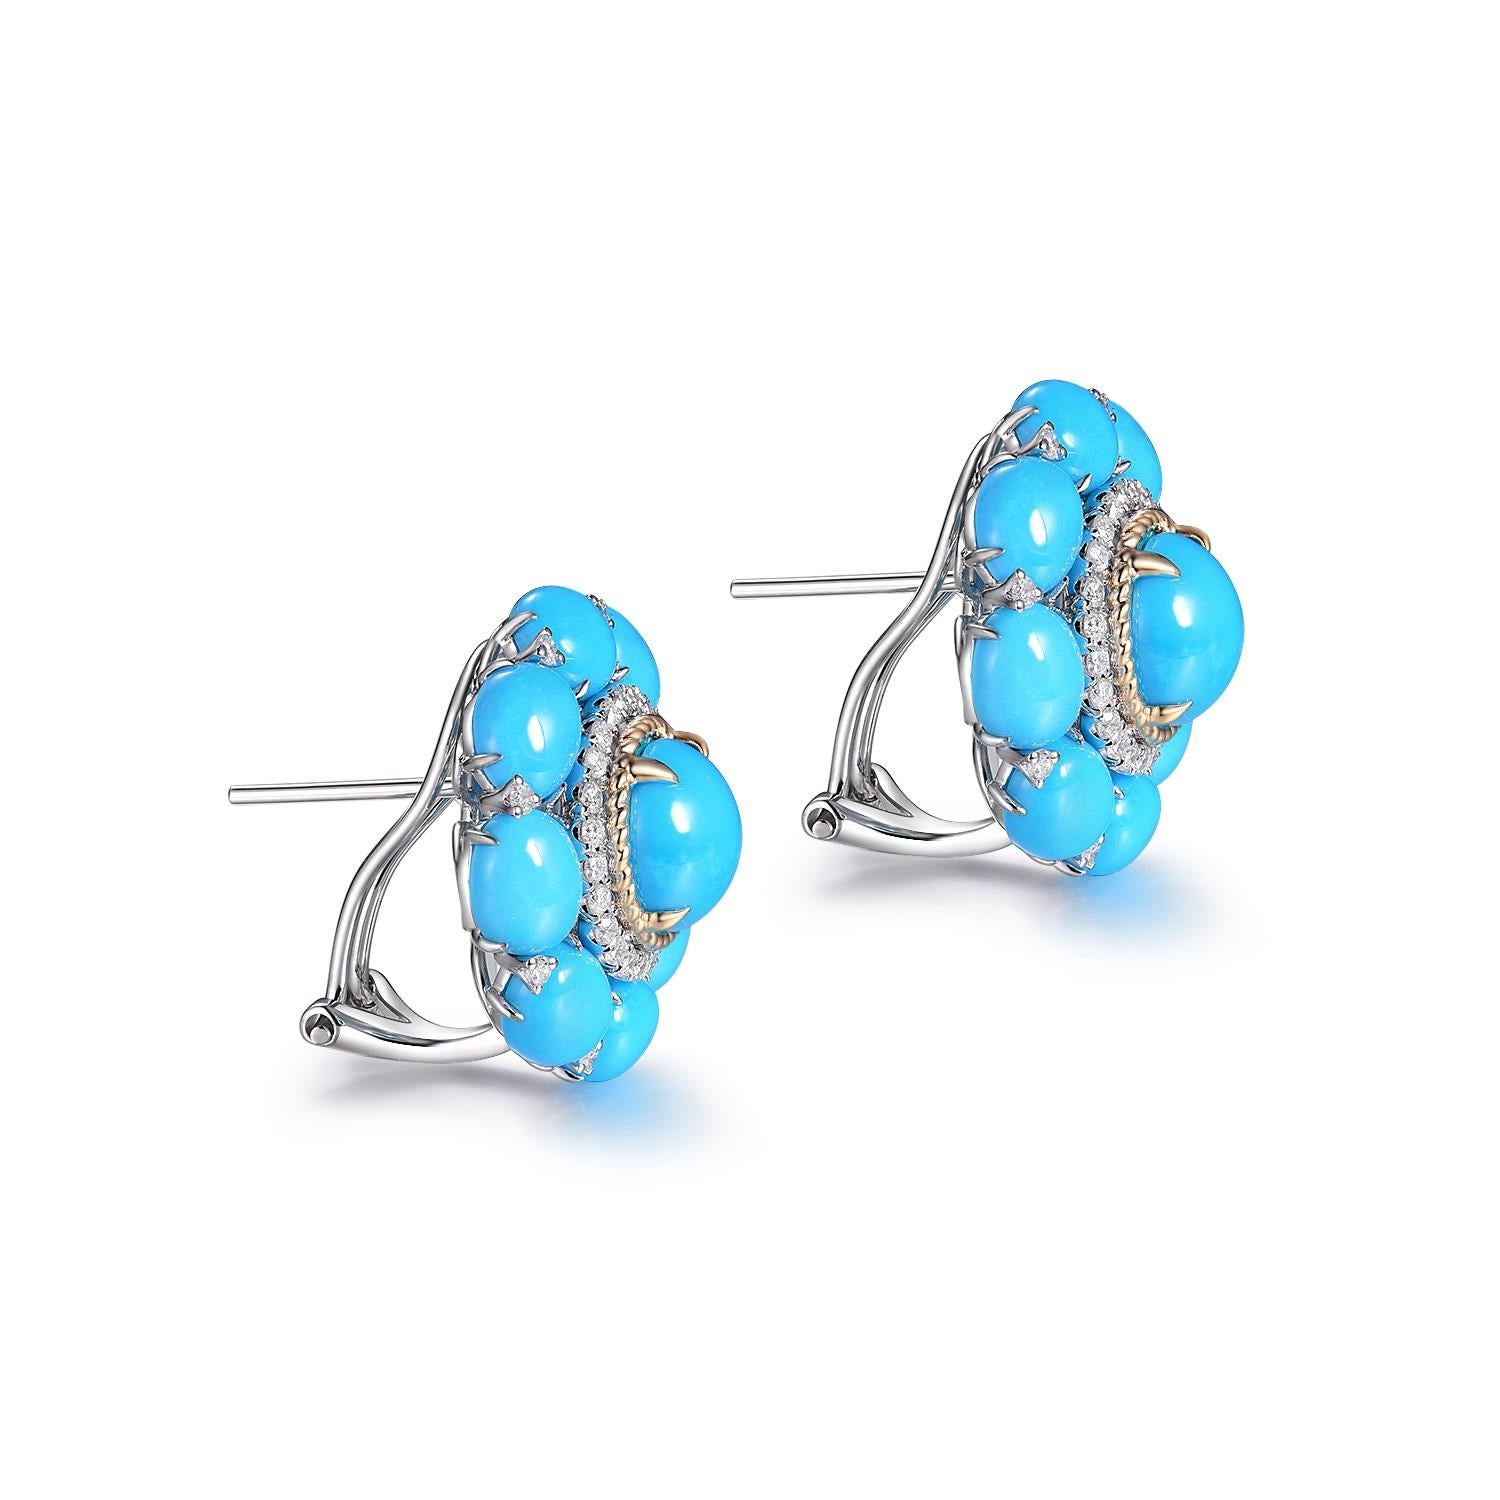 The Turquoise Diamond Earrings are a striking pair of earrings that beautifully showcase the vibrant hues of turquoise and the sparkling brilliance of diamonds. Crafted in 14 karat white and yellow gold, these earrings exude elegance and